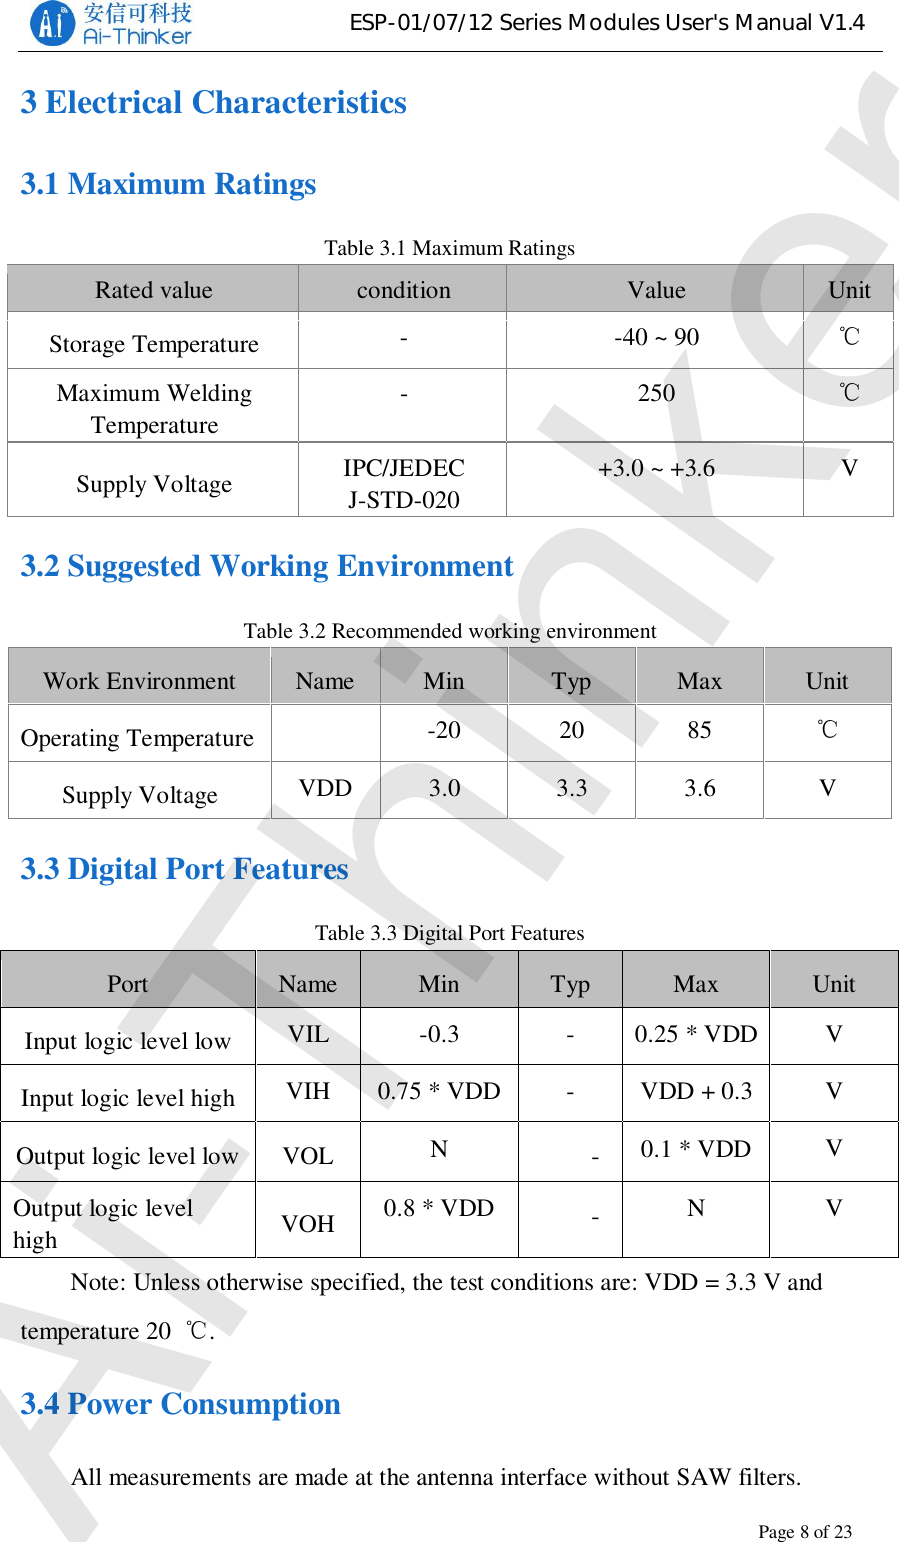 ESP-01/07/12 Series Modules User&apos;s Manual V1.4Copyright © 2017 Shenzhen Ai-Thinker Technology Co., Ltd All Rights ReservedPage8of233 Electrical Characteristics3.1 Maximum RatingsTable 3.1 Maximum RatingsRated value condition Value UnitStorage Temperature --40 ~ 90 Maximum WeldingTemperature-250 Supply Voltage IPC/JEDECJ-STD-020+3.0 ~ +3.6 V3.2 Suggested Working EnvironmentTable 3.2 Recommended working environmentWork Environment Name Min Typ Max UnitOperating Temperature -20 20 85 Supply Voltage VDD 3.0 3.3 3.6 V3.3 Digital Port FeaturesTable 3.3 Digital Port FeaturesPort Name Min Typ Max UnitInput logic level low VIL -0.3 - 0.25 * VDD VInput logic level high VIH  0.75 * VDD - VDD + 0.3 VOutput logic level low VOL N-0.1 * VDD VOutput logic levelhigh VOH 0.8 * VDD -N VNote: Unless otherwise specified, the test conditions are: VDD = 3.3 V andtemperature 20 .3.4 Power ConsumptionAll measurements are made at the antenna interface without SAW filters.Ai-Thinker